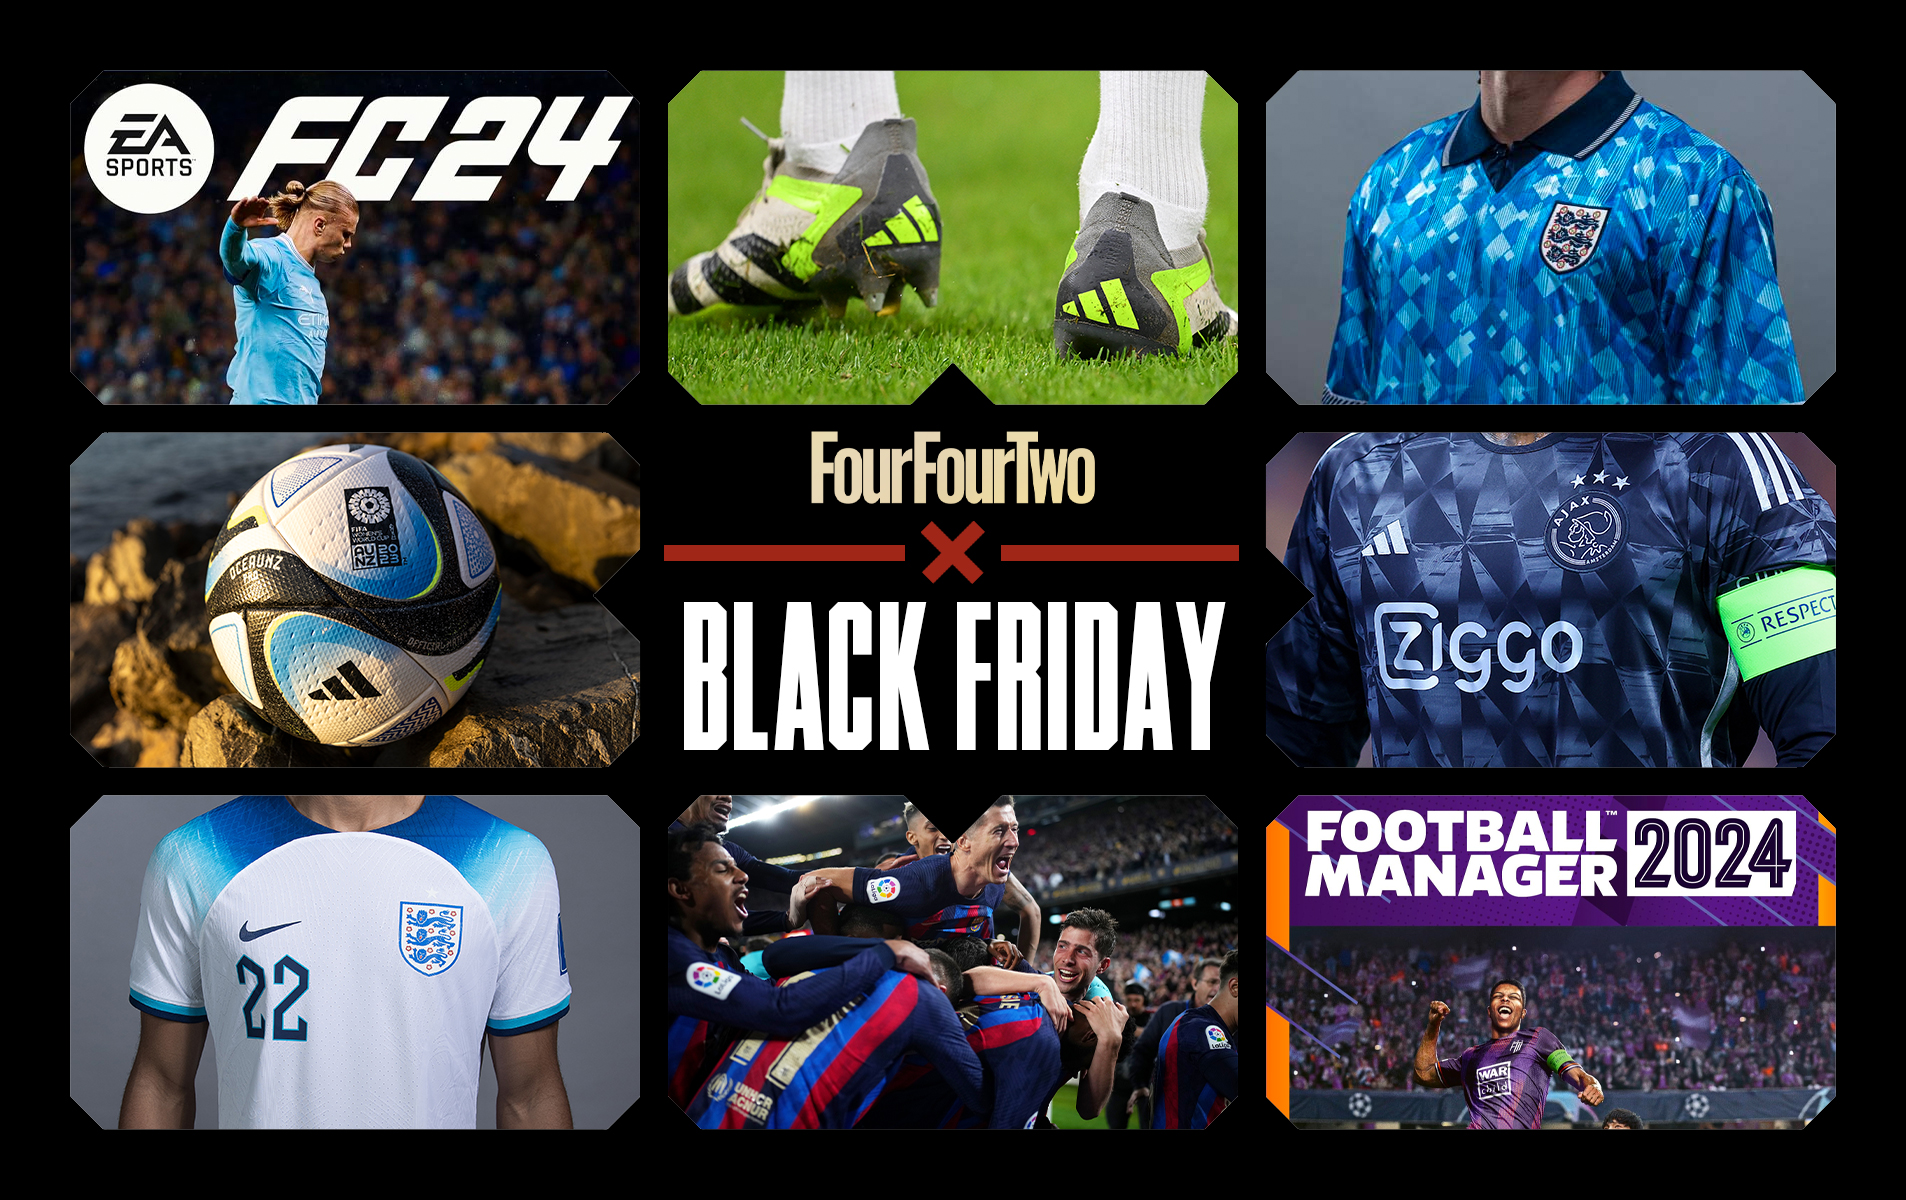 Black Friday Football Deals 2023 live: The best soccer deals as we find them